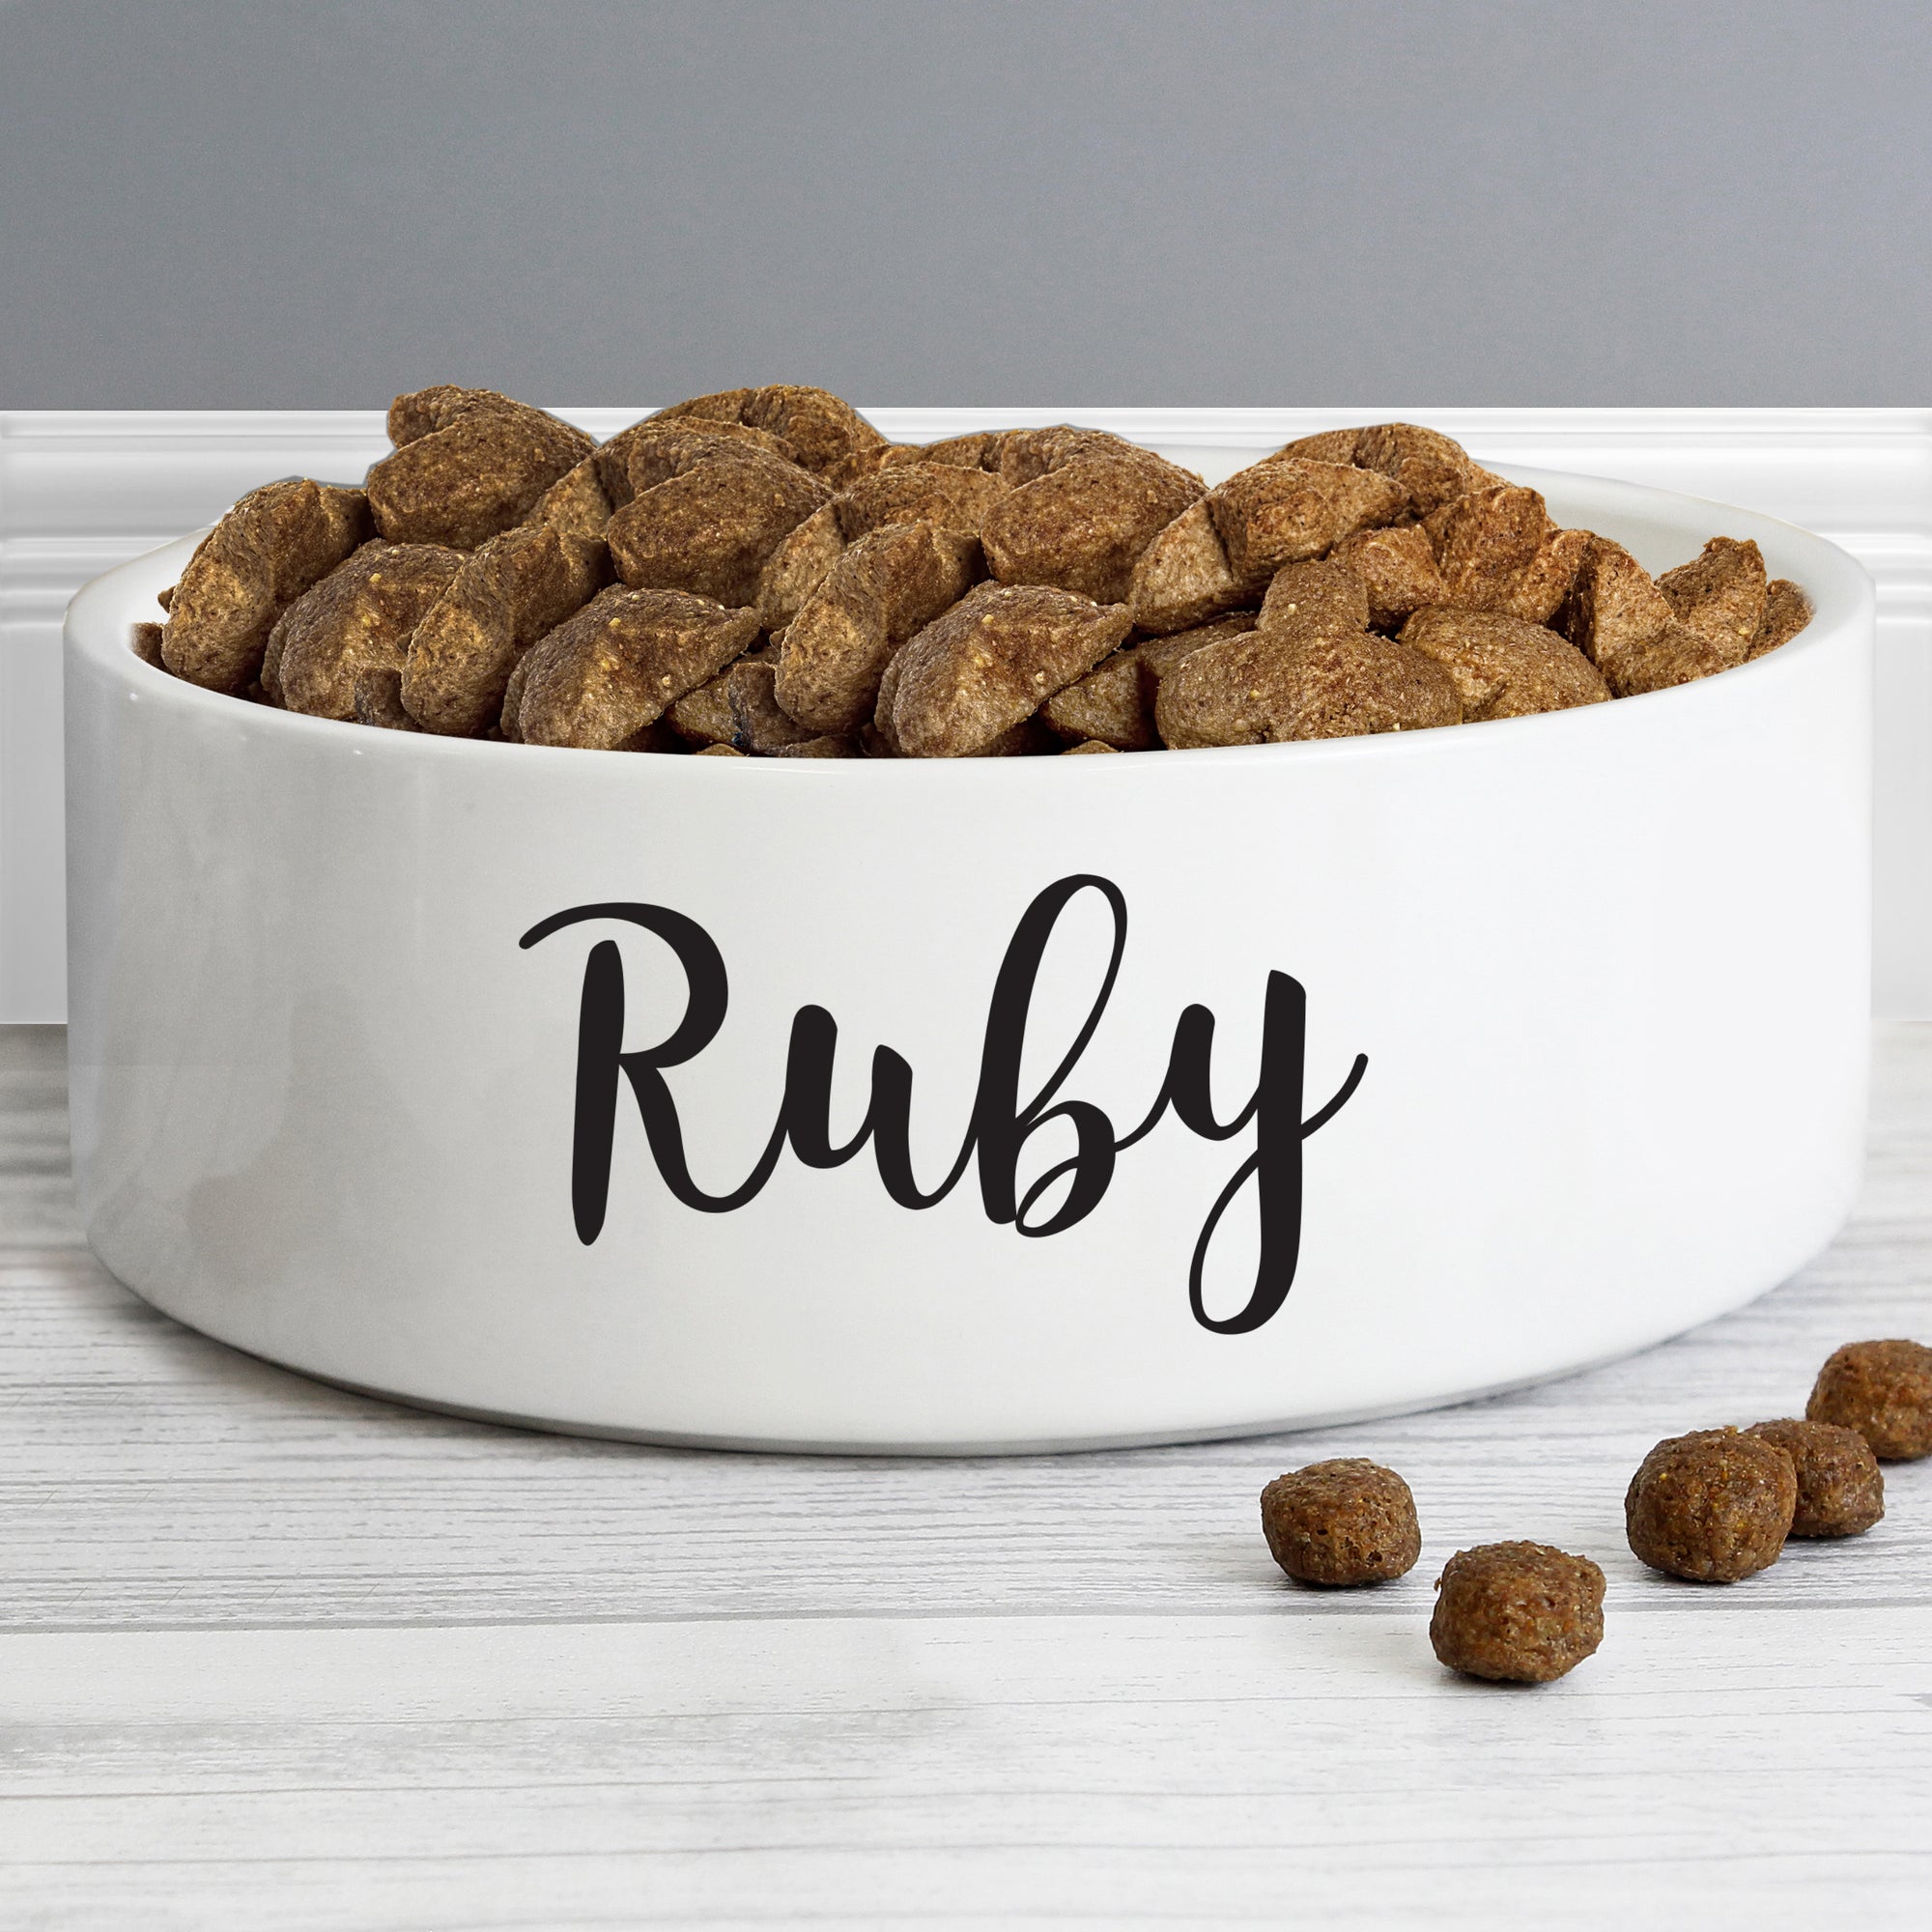 Image of Personalised White Ceramic Pet Bowl with Black Lettering in a modern script font